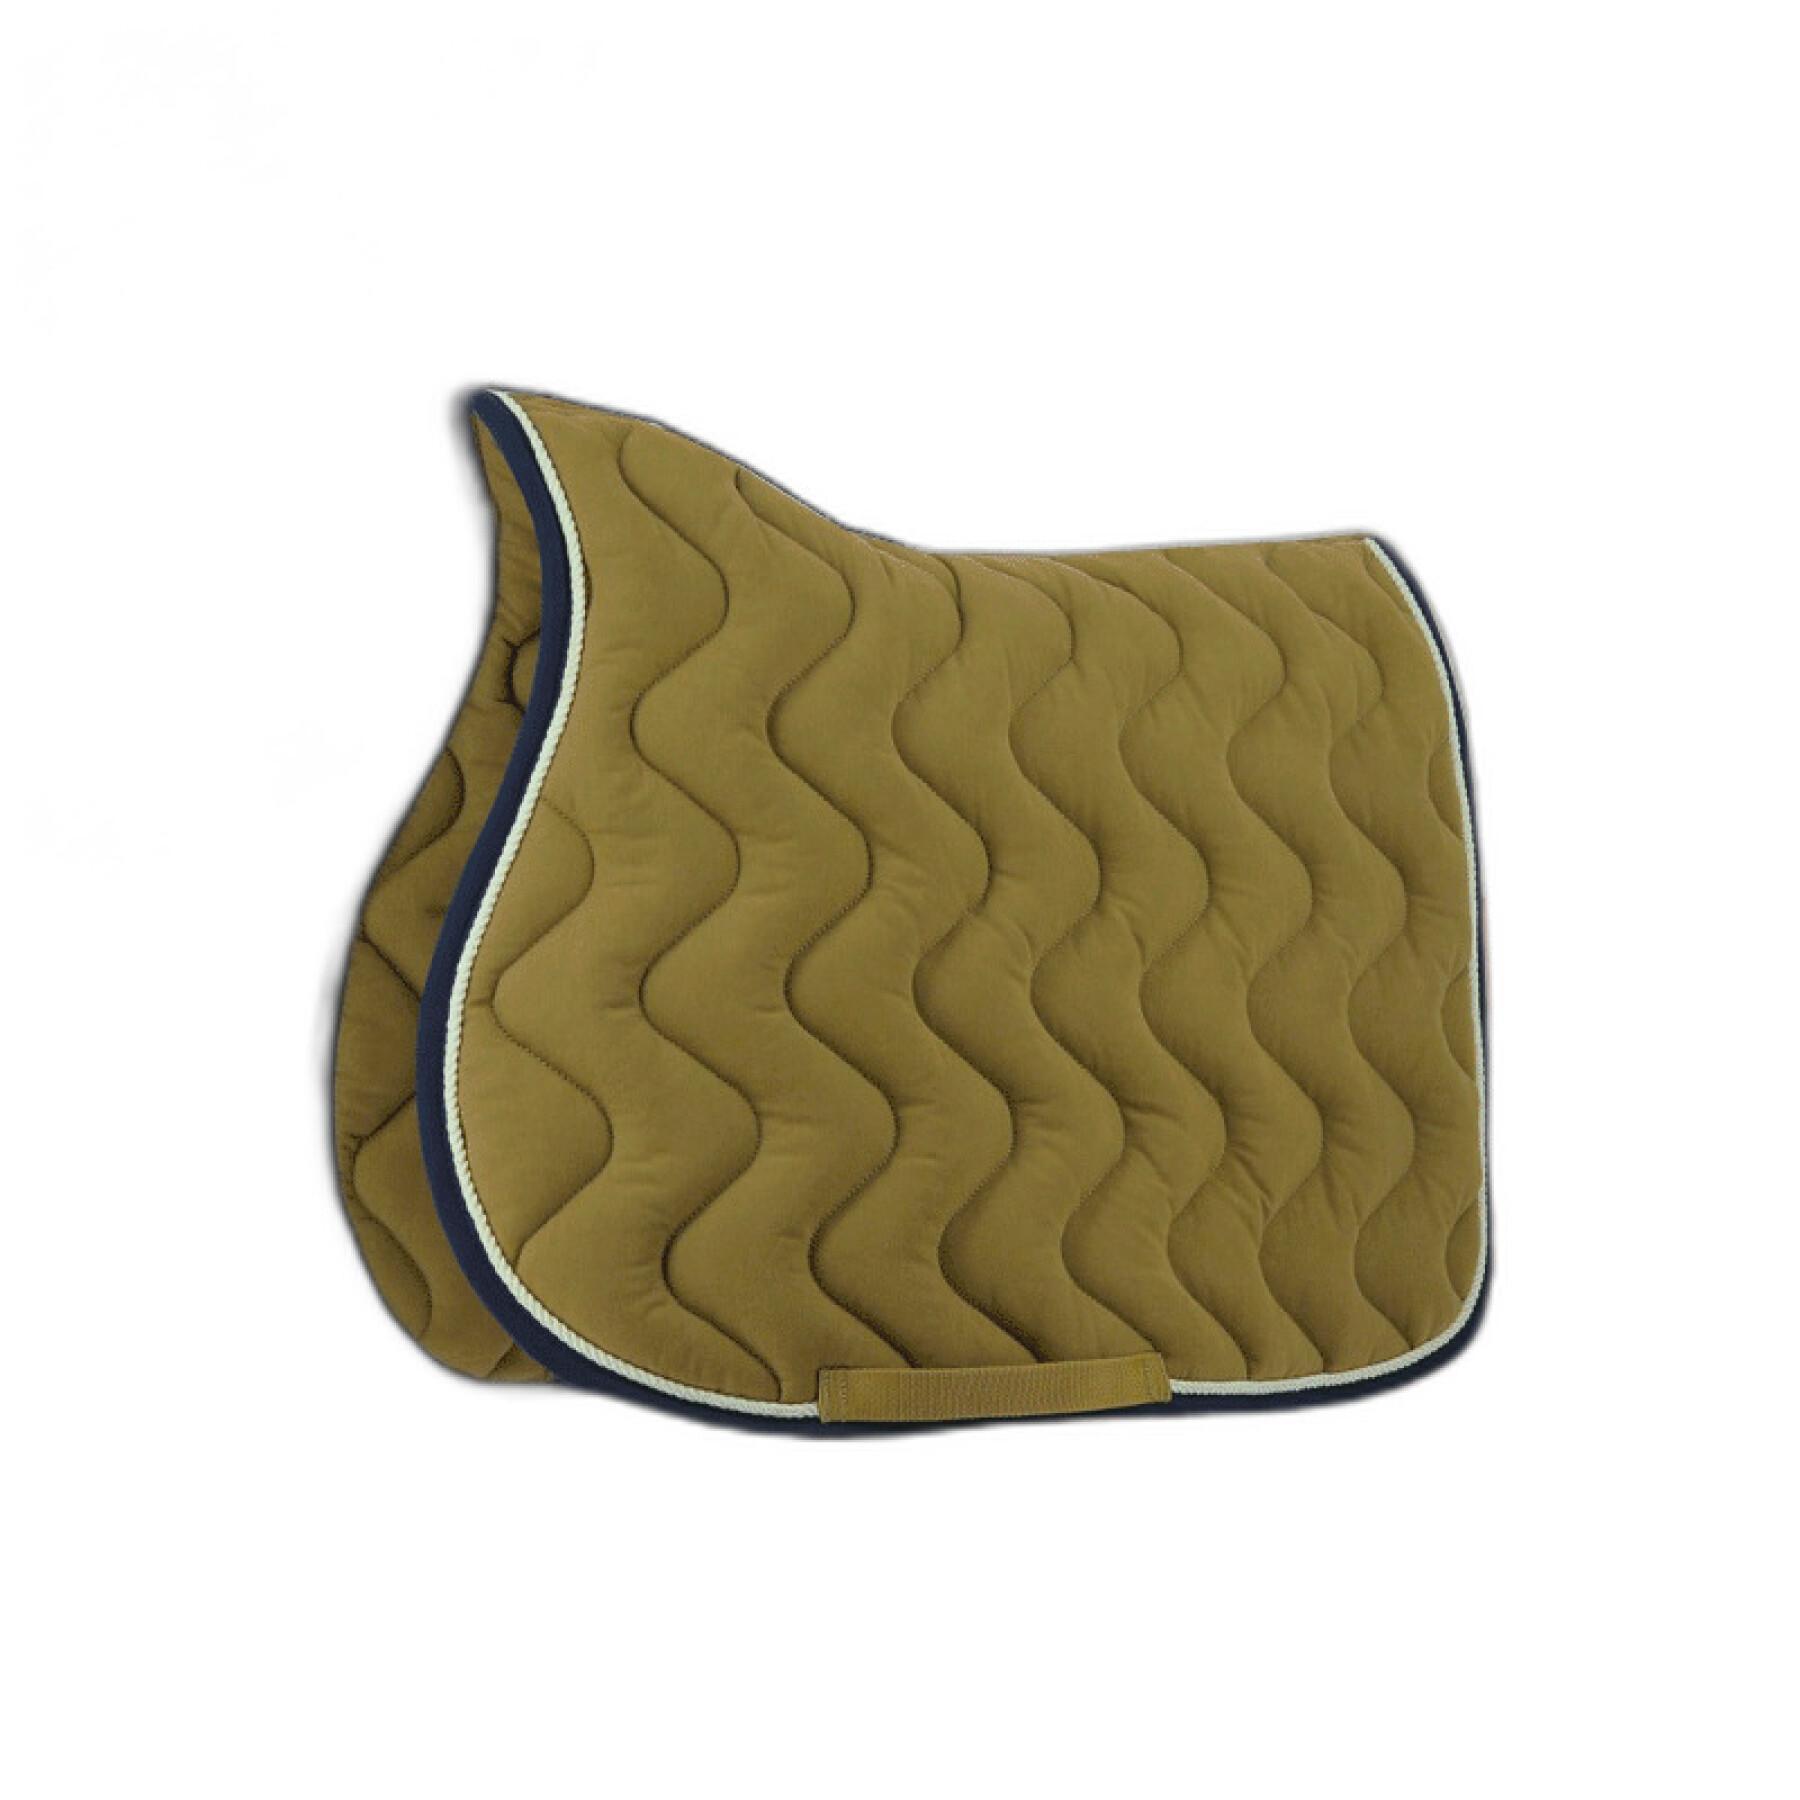 Saddle pad for horses Equithème Polyfun